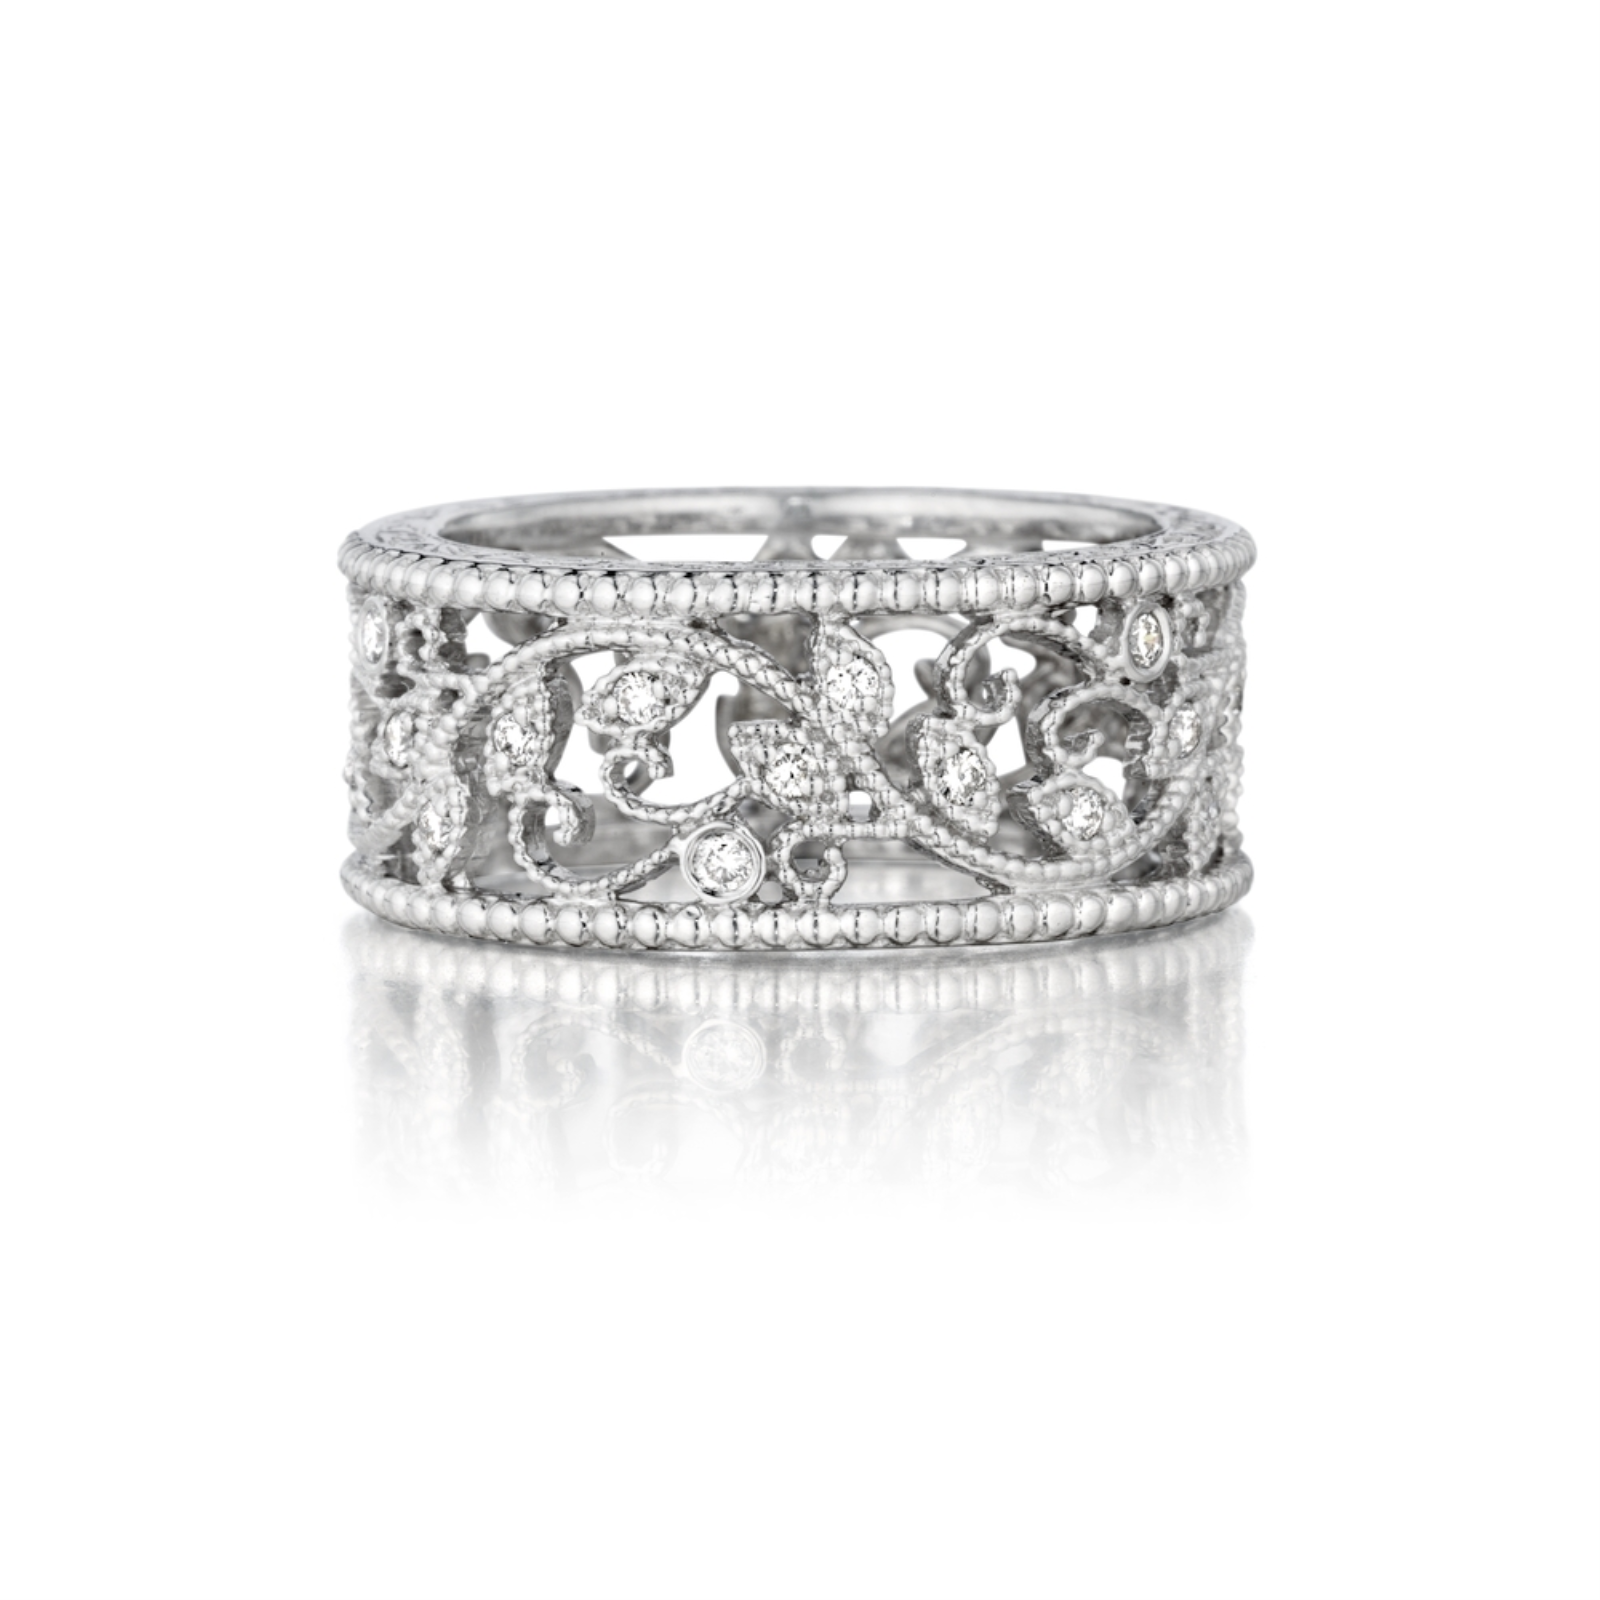 White Gold and Diamond Wide Scroll Leaf Band